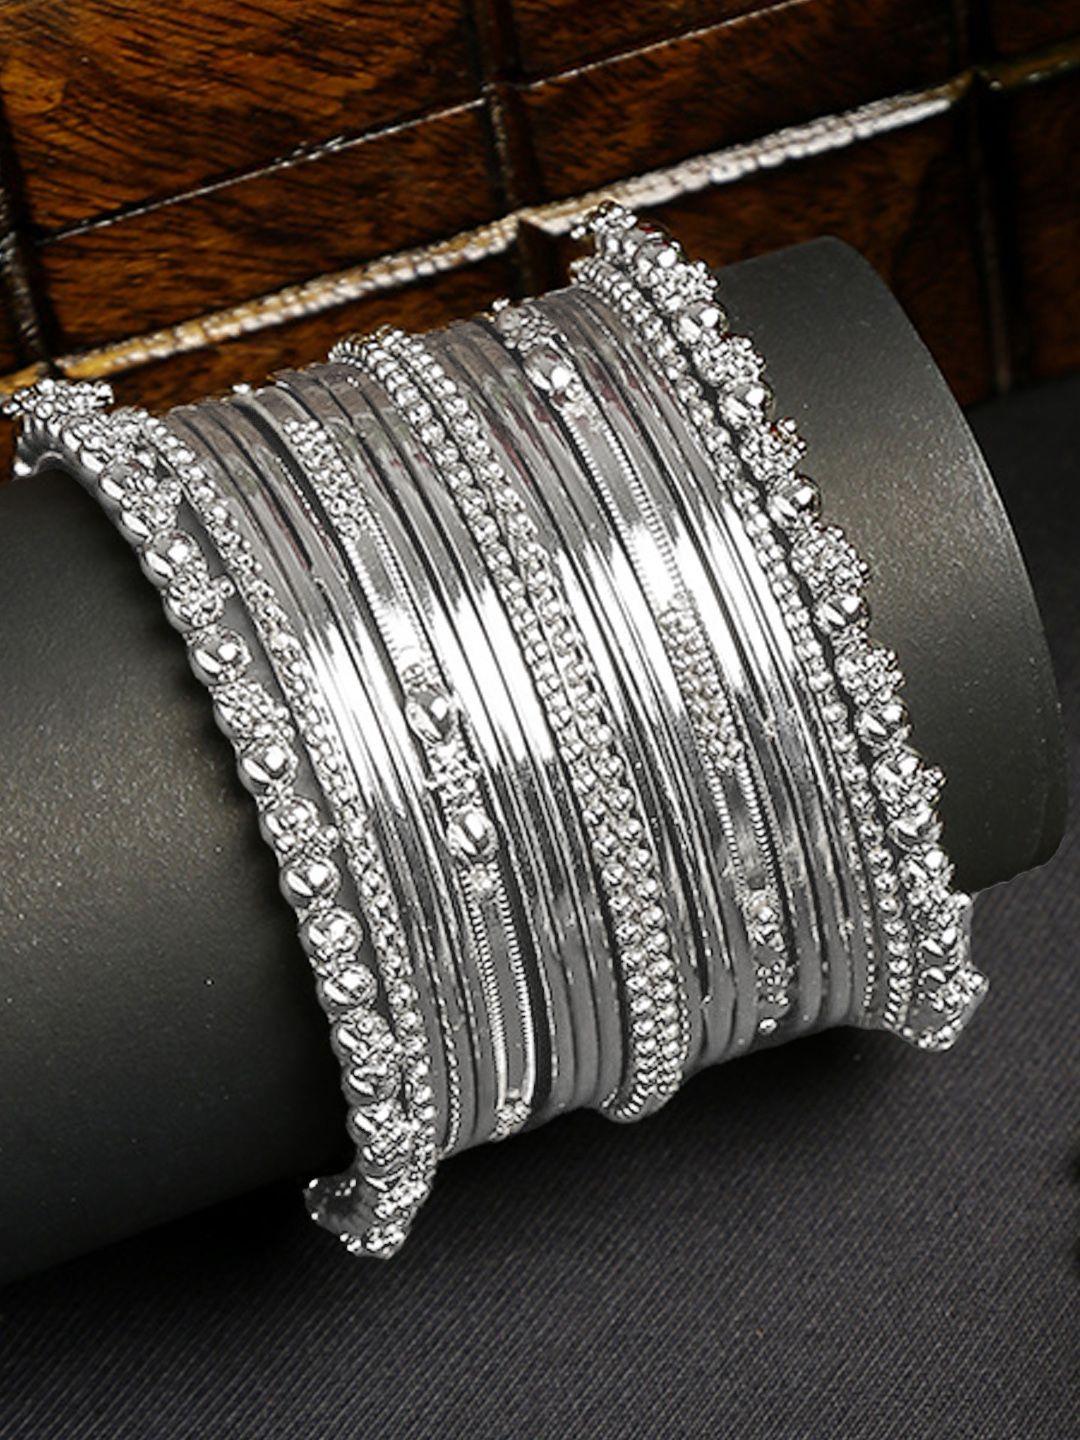 youbella set of 20 silver-plated beaded bangles